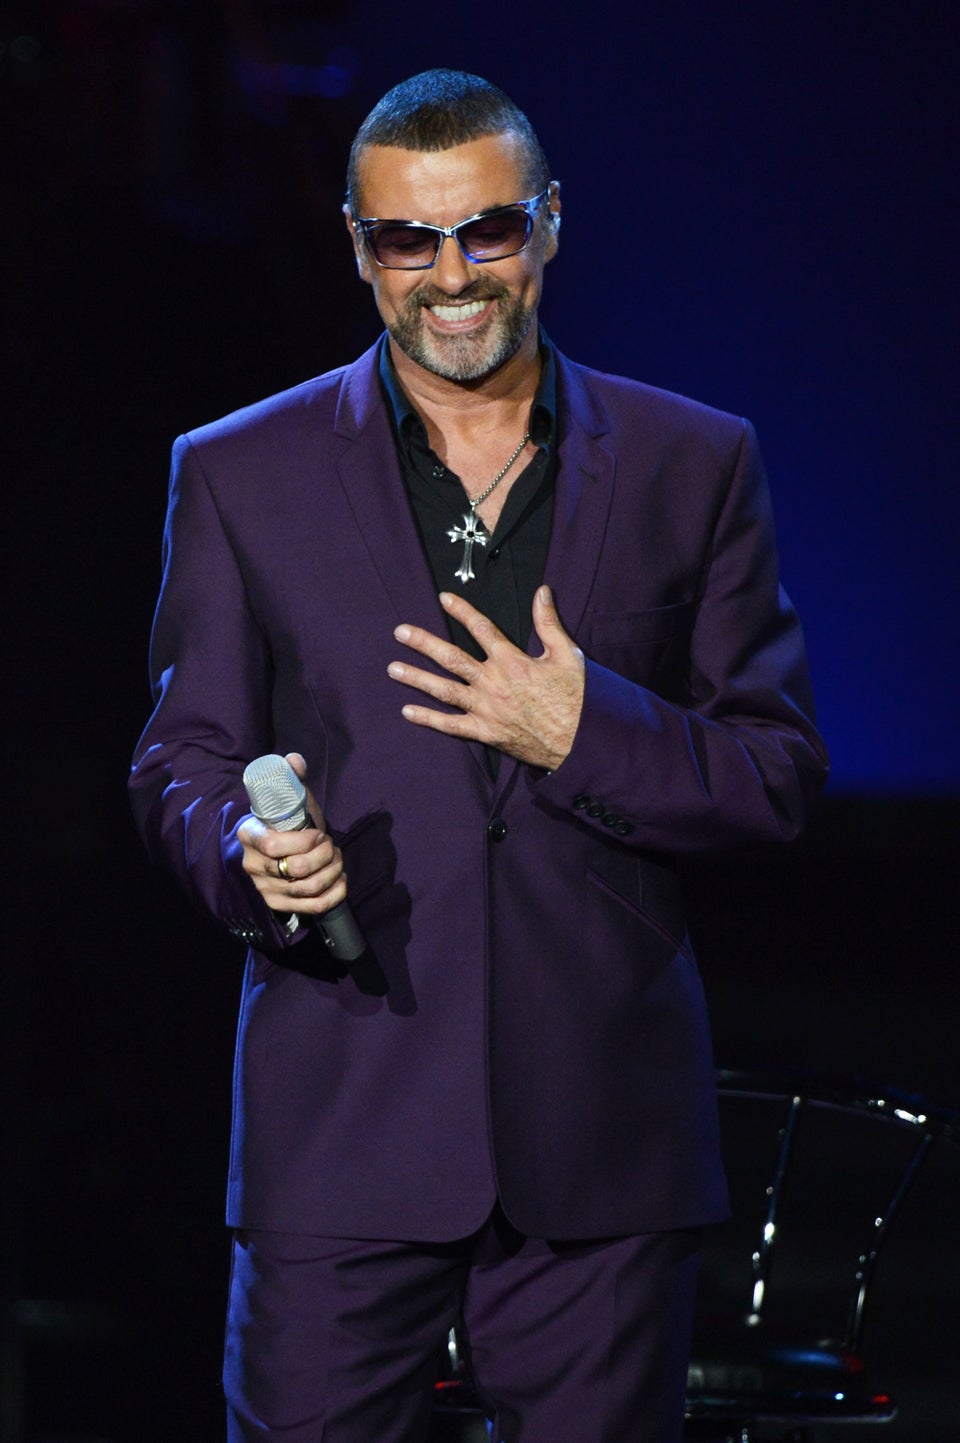 George Michael’s Boyfriend Reveals Singer Died Alone: ‘George Was Looking Forward to Christmas… Now Everything Is Ruined’